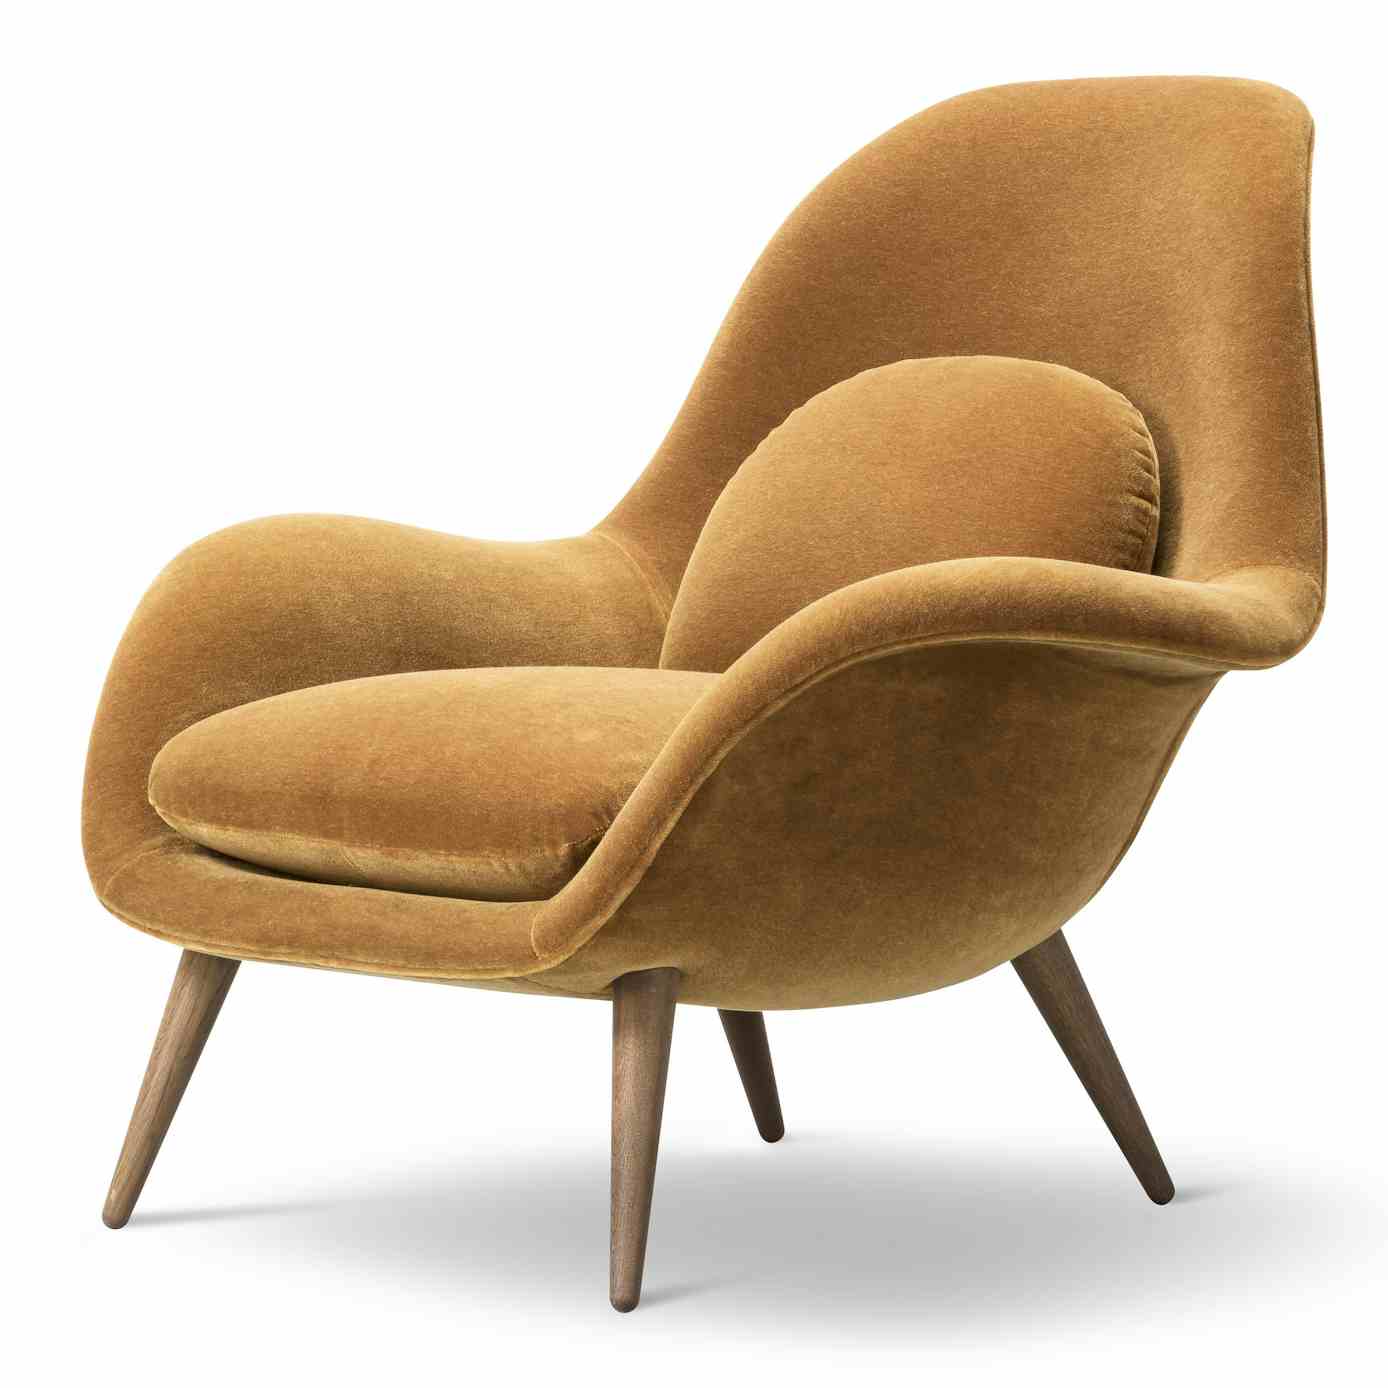 Fredericia Furniture Swoon Chair Product Angle Haute Living